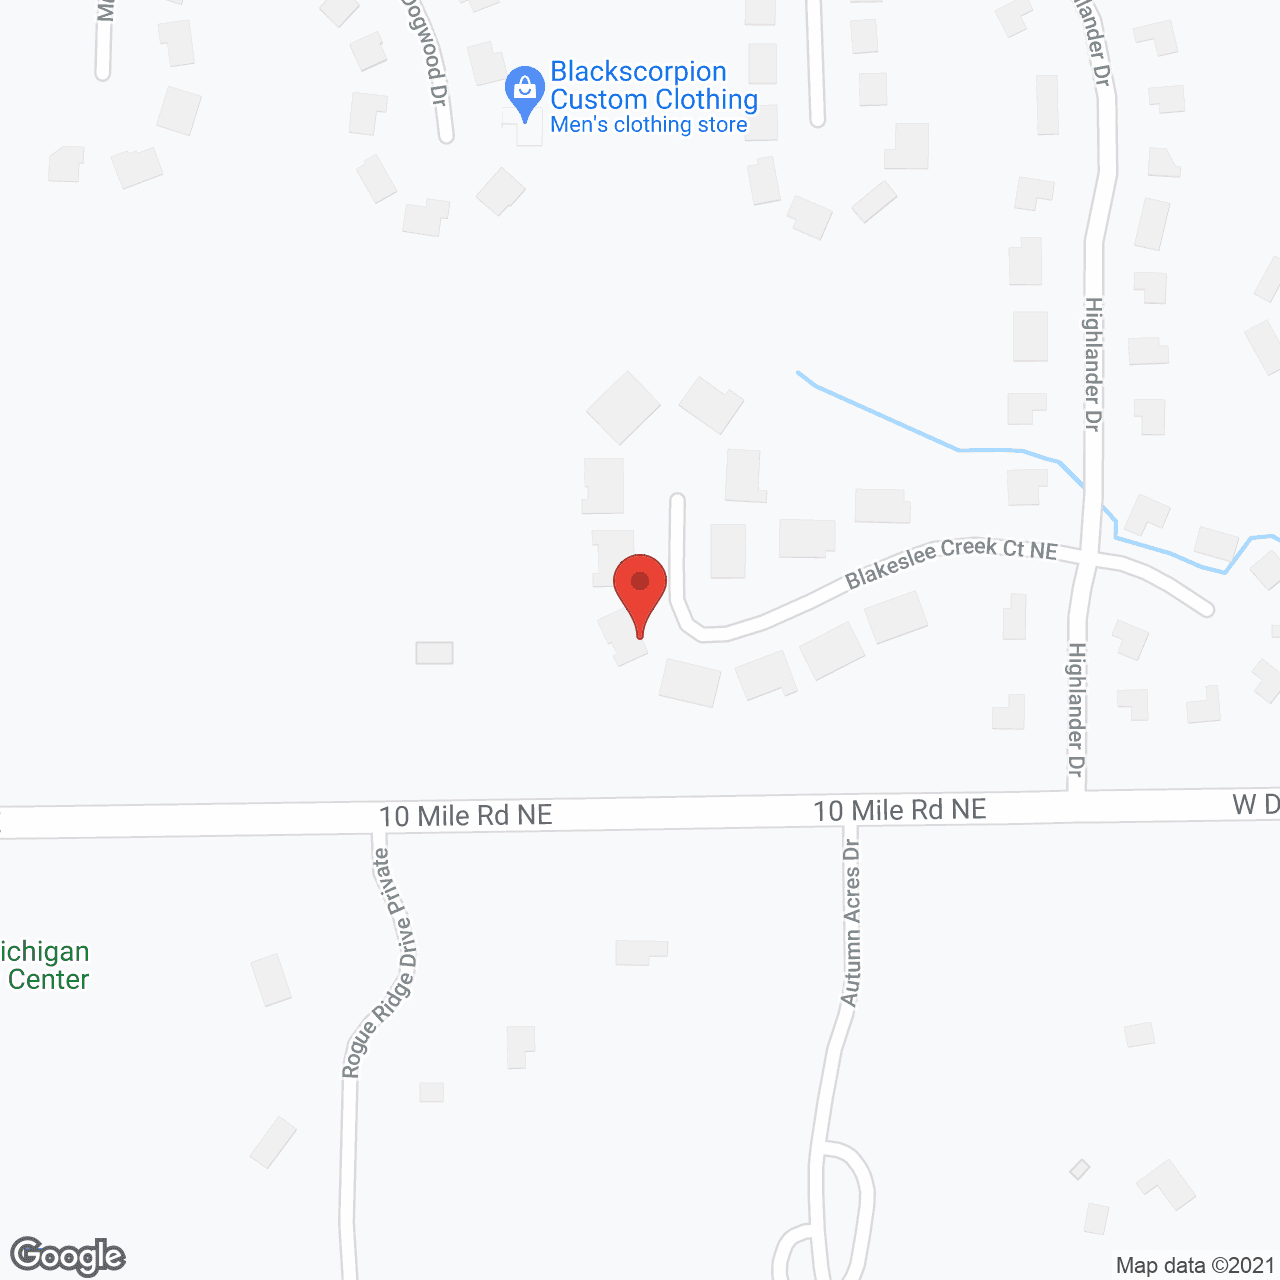 Aegin Place of Central Michigan in google map